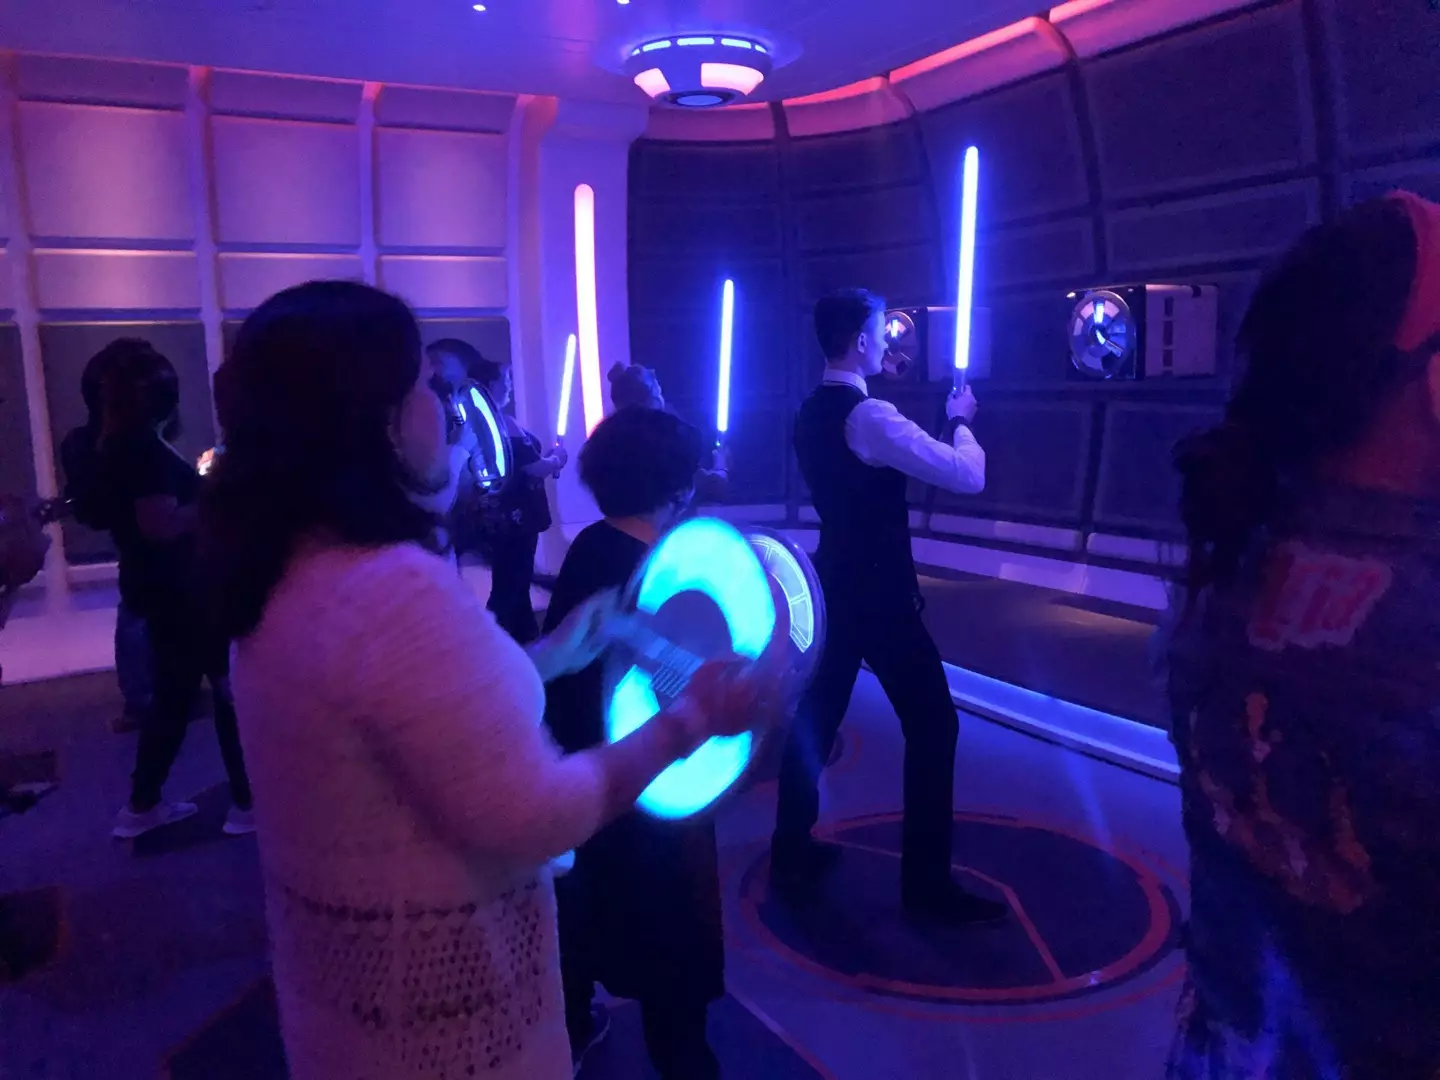 Guests could partake in lightsaber training.